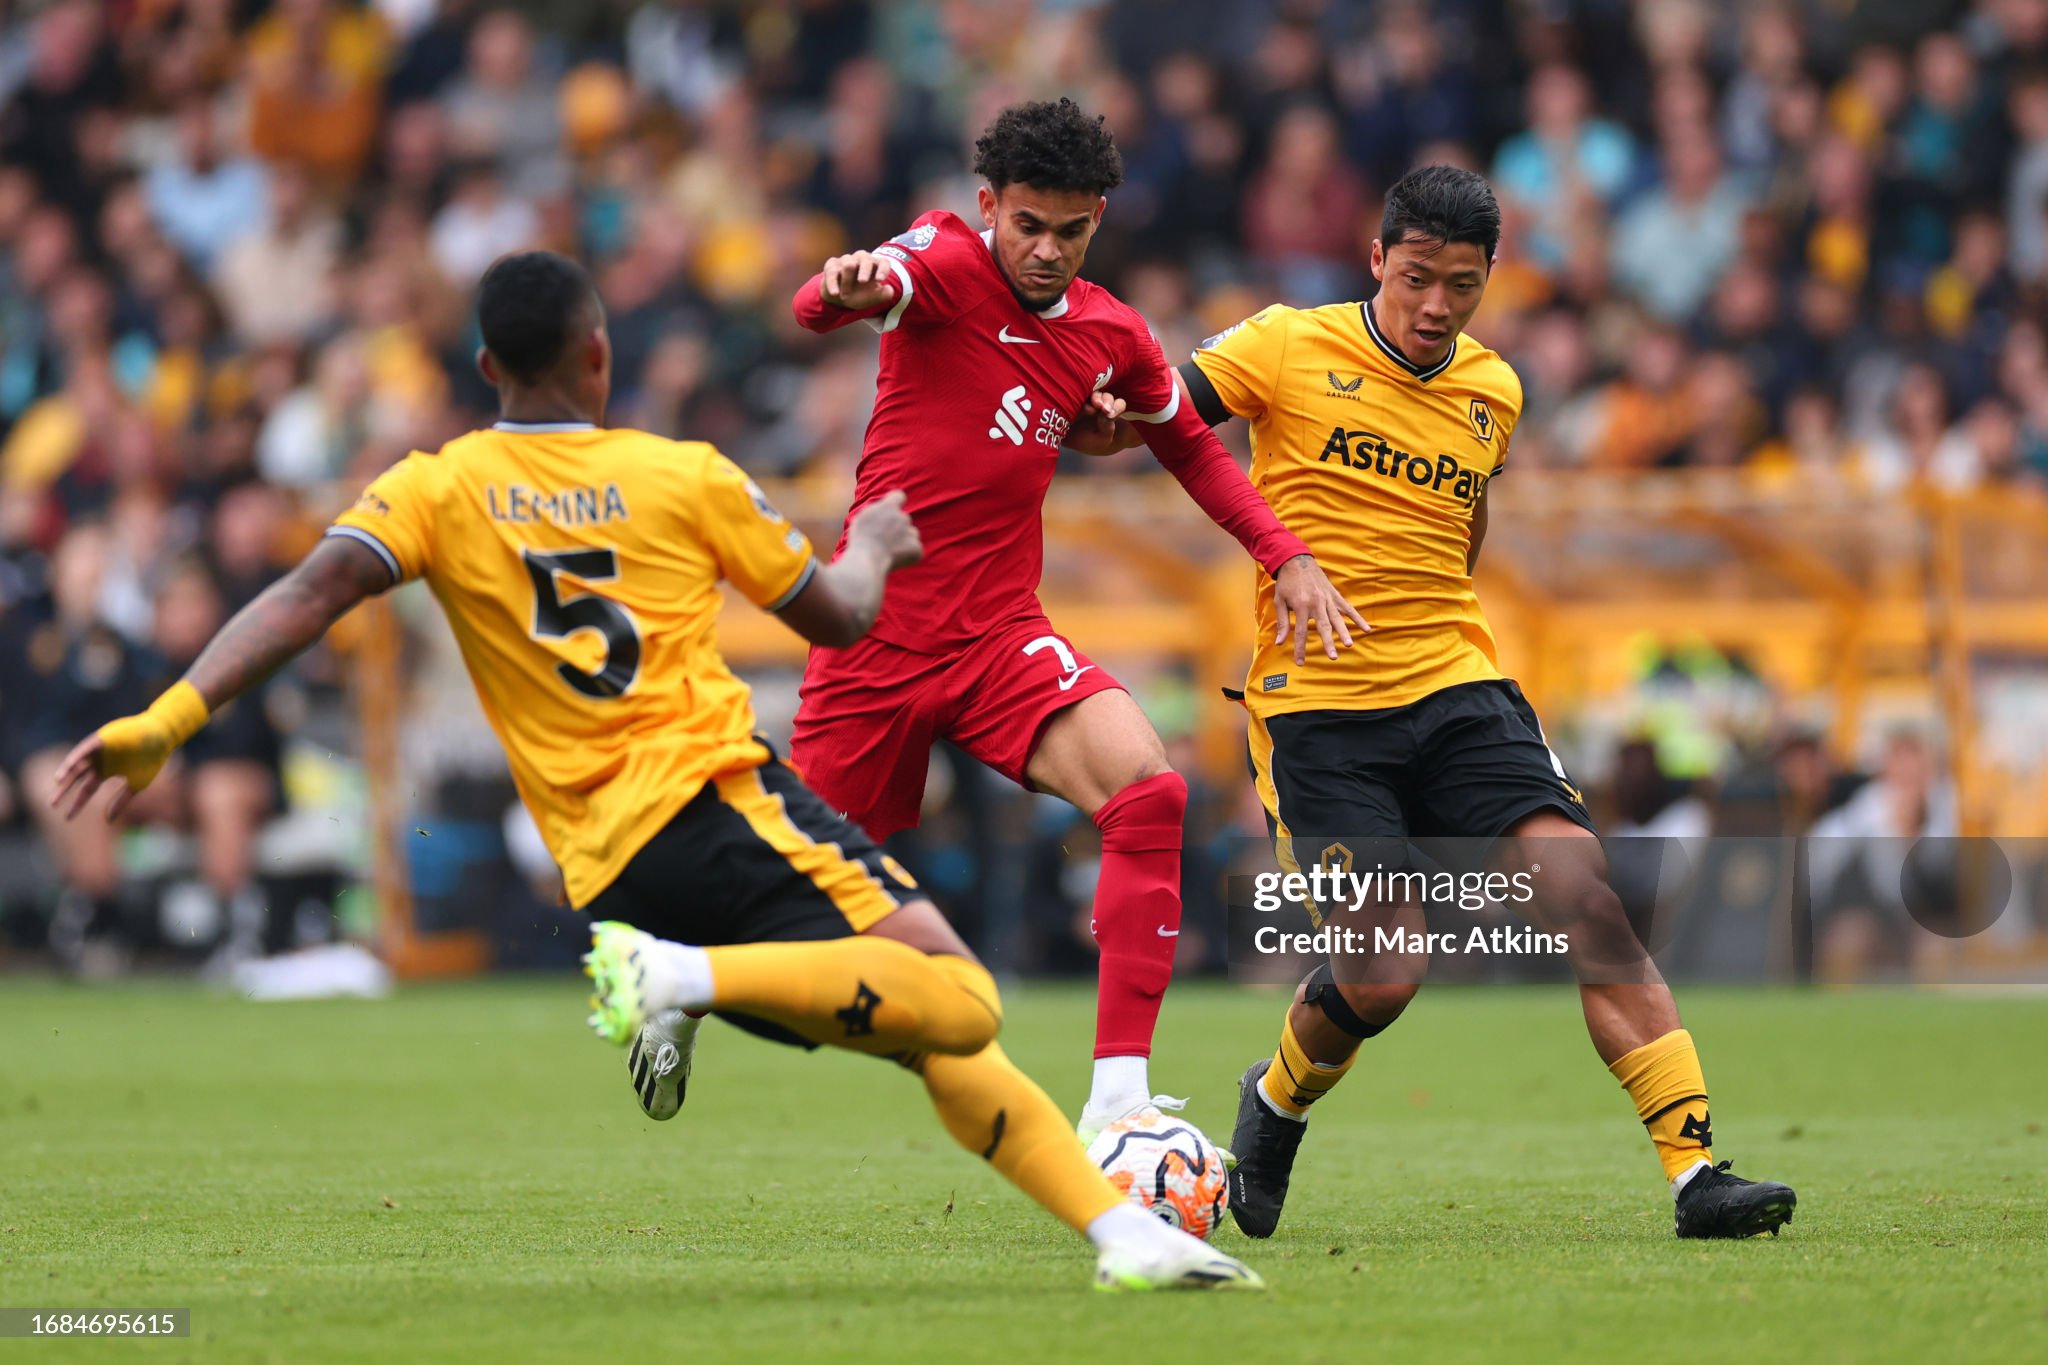 Liverpool edge past Wolverhampton in the final phase, goal by Gakpo